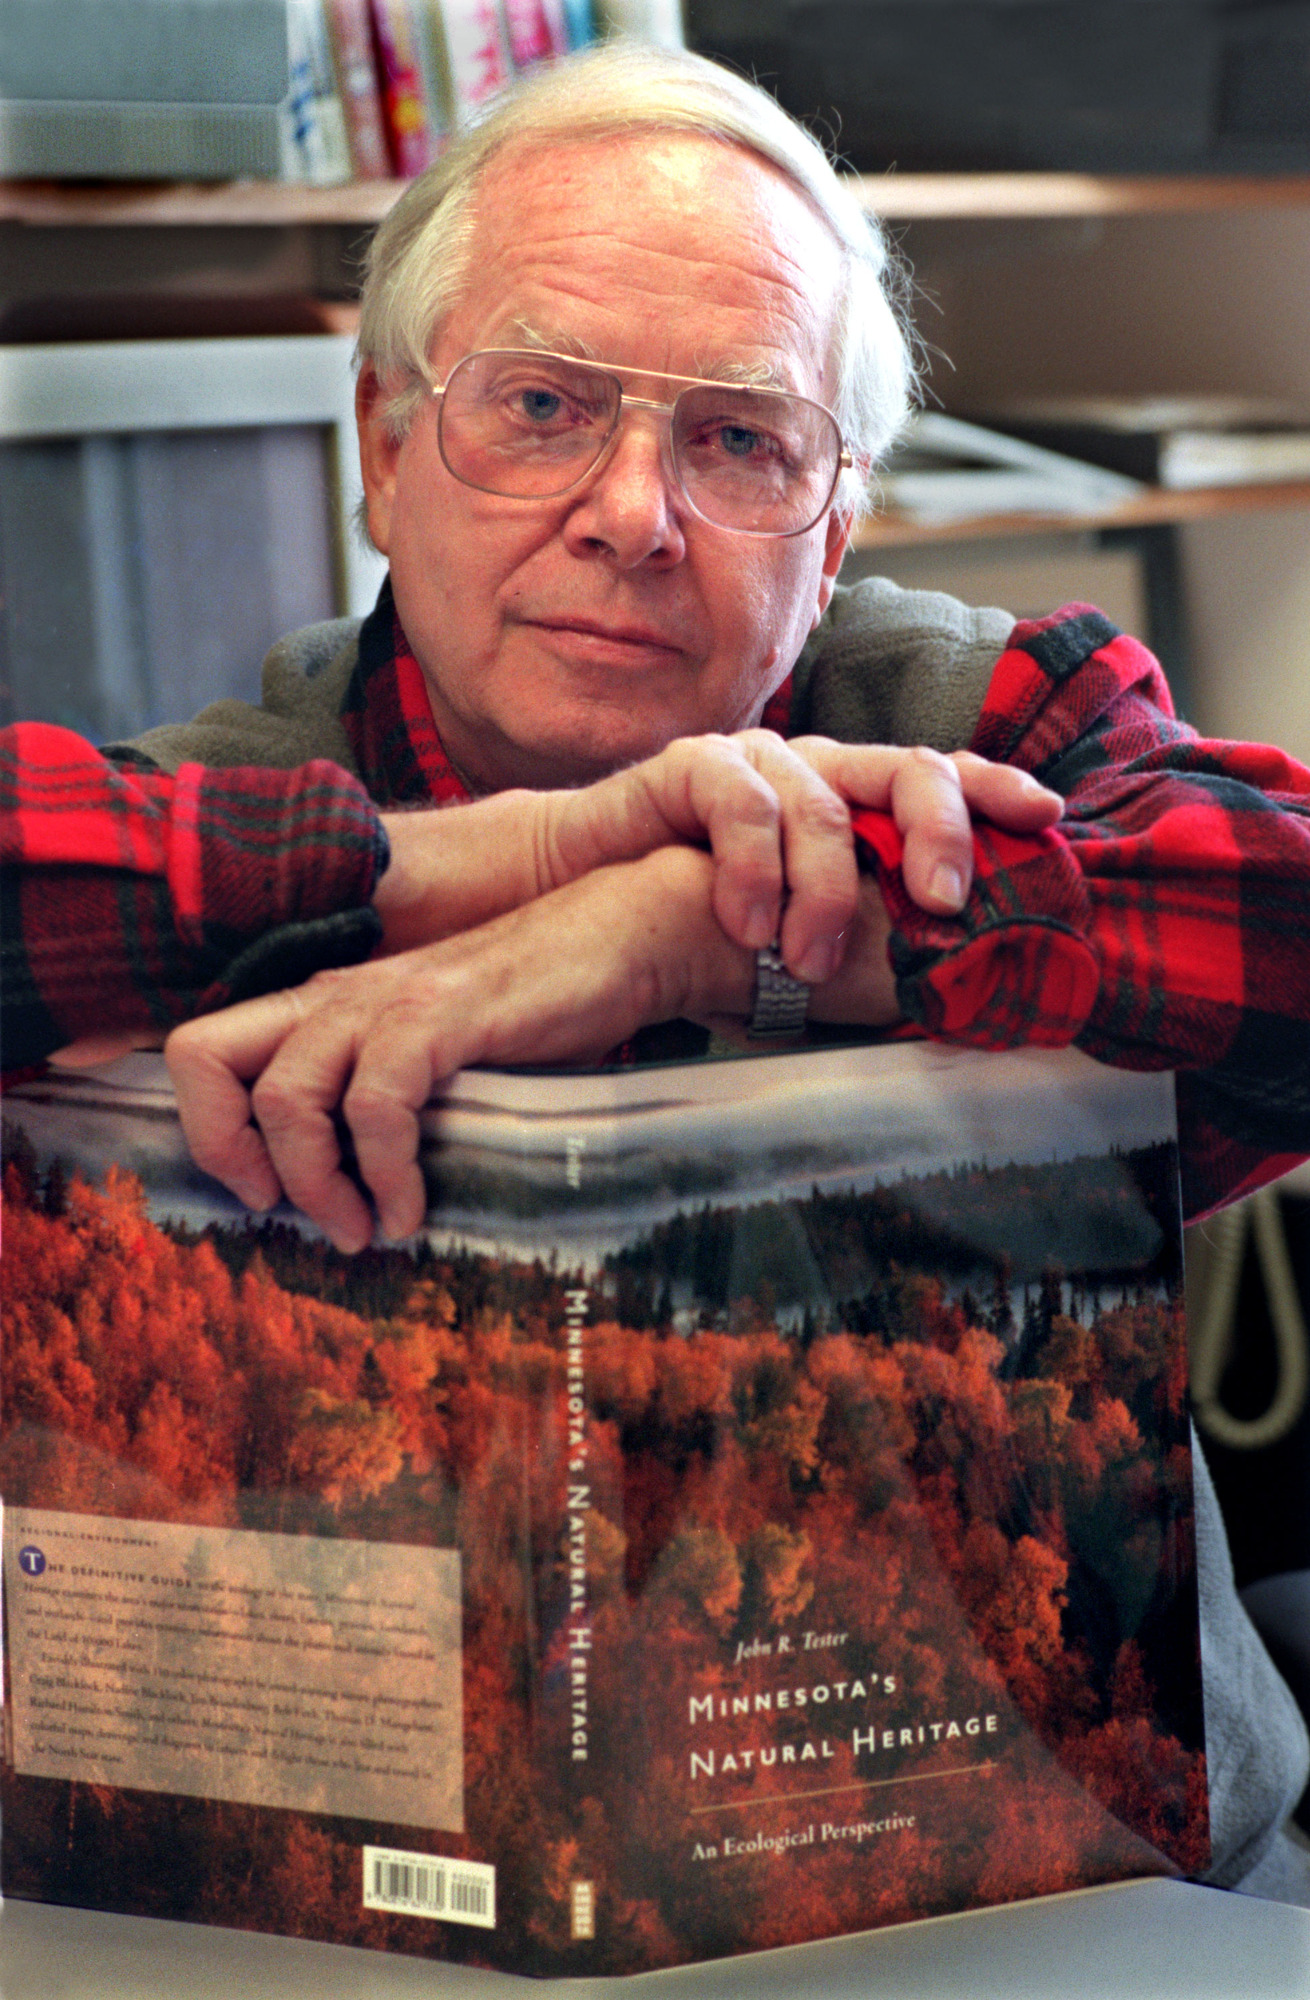 John Tester, with his book “Minnesota’s Natural Heritage” when it was published in 1995.